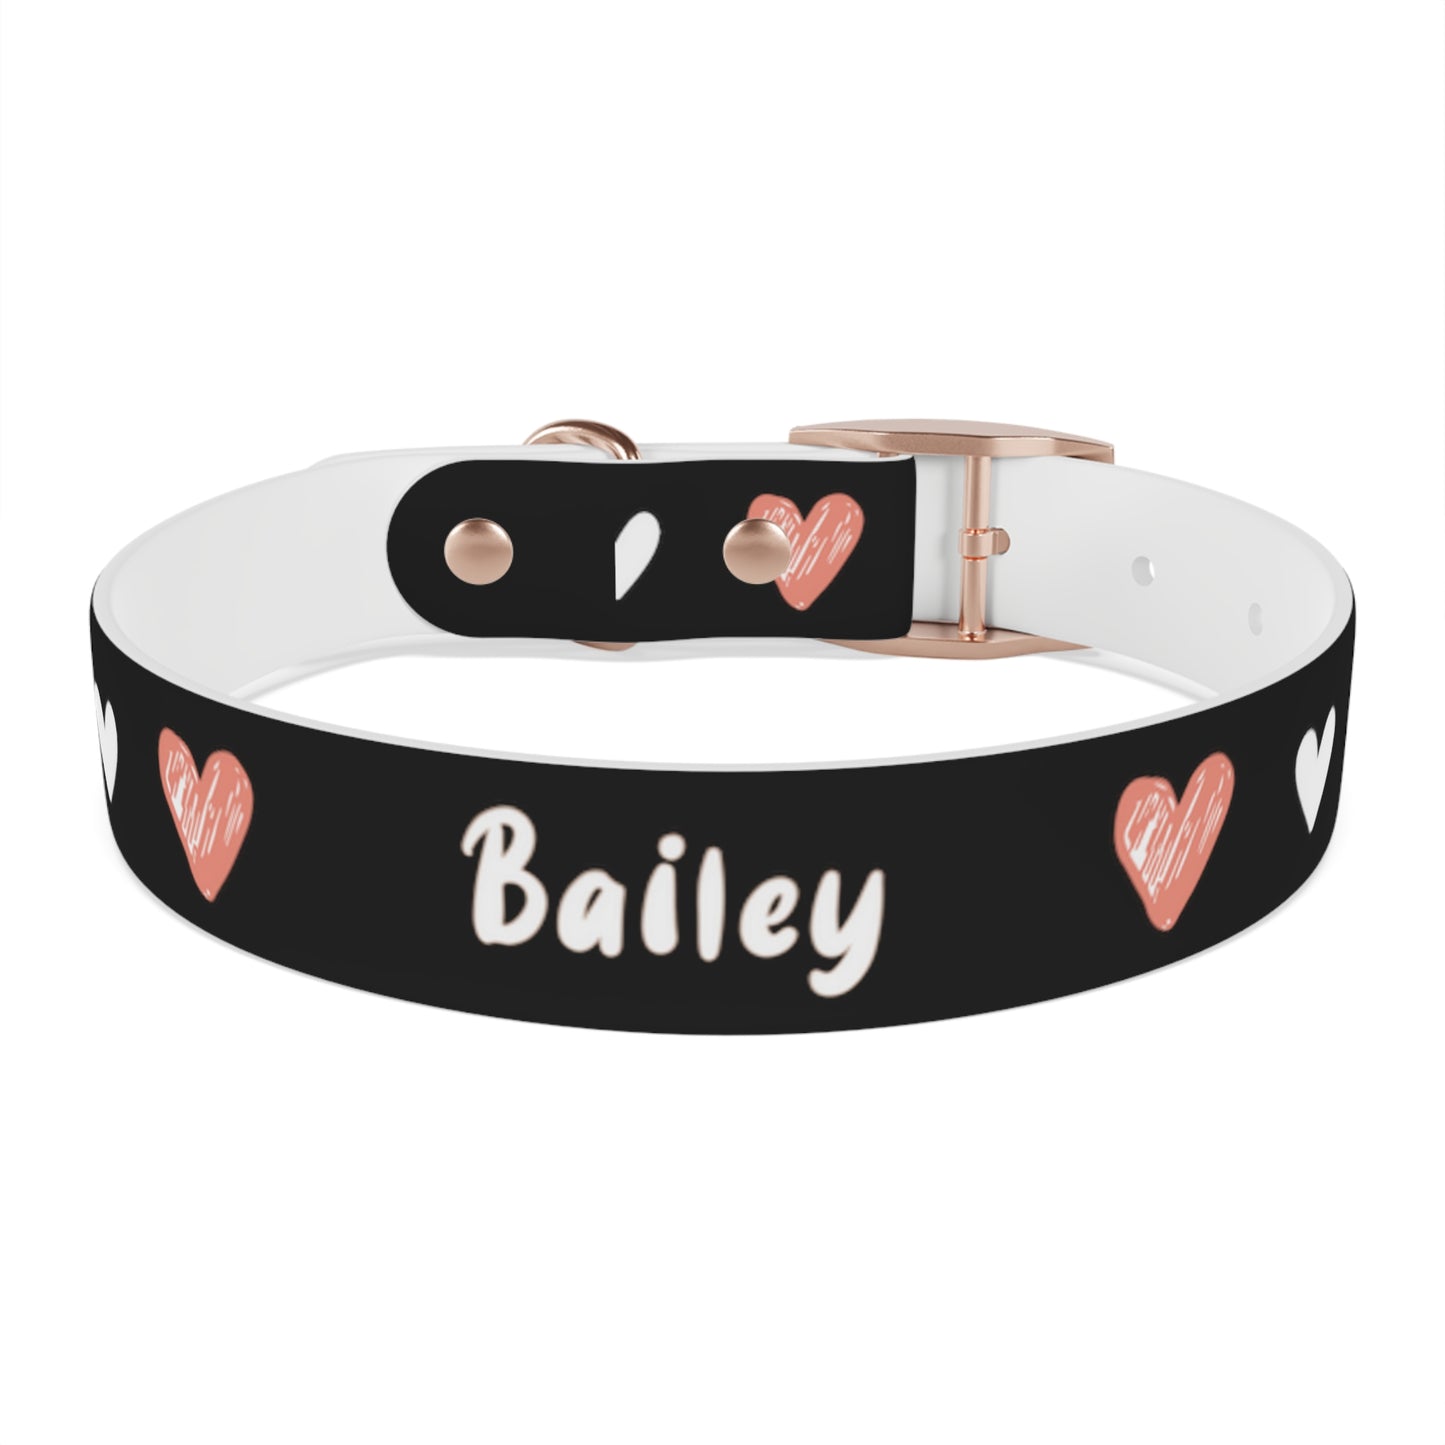 a dog collar with a beautiful hearts pattern design and the dog's name in the middle of the collar. The color of the dog collar is black